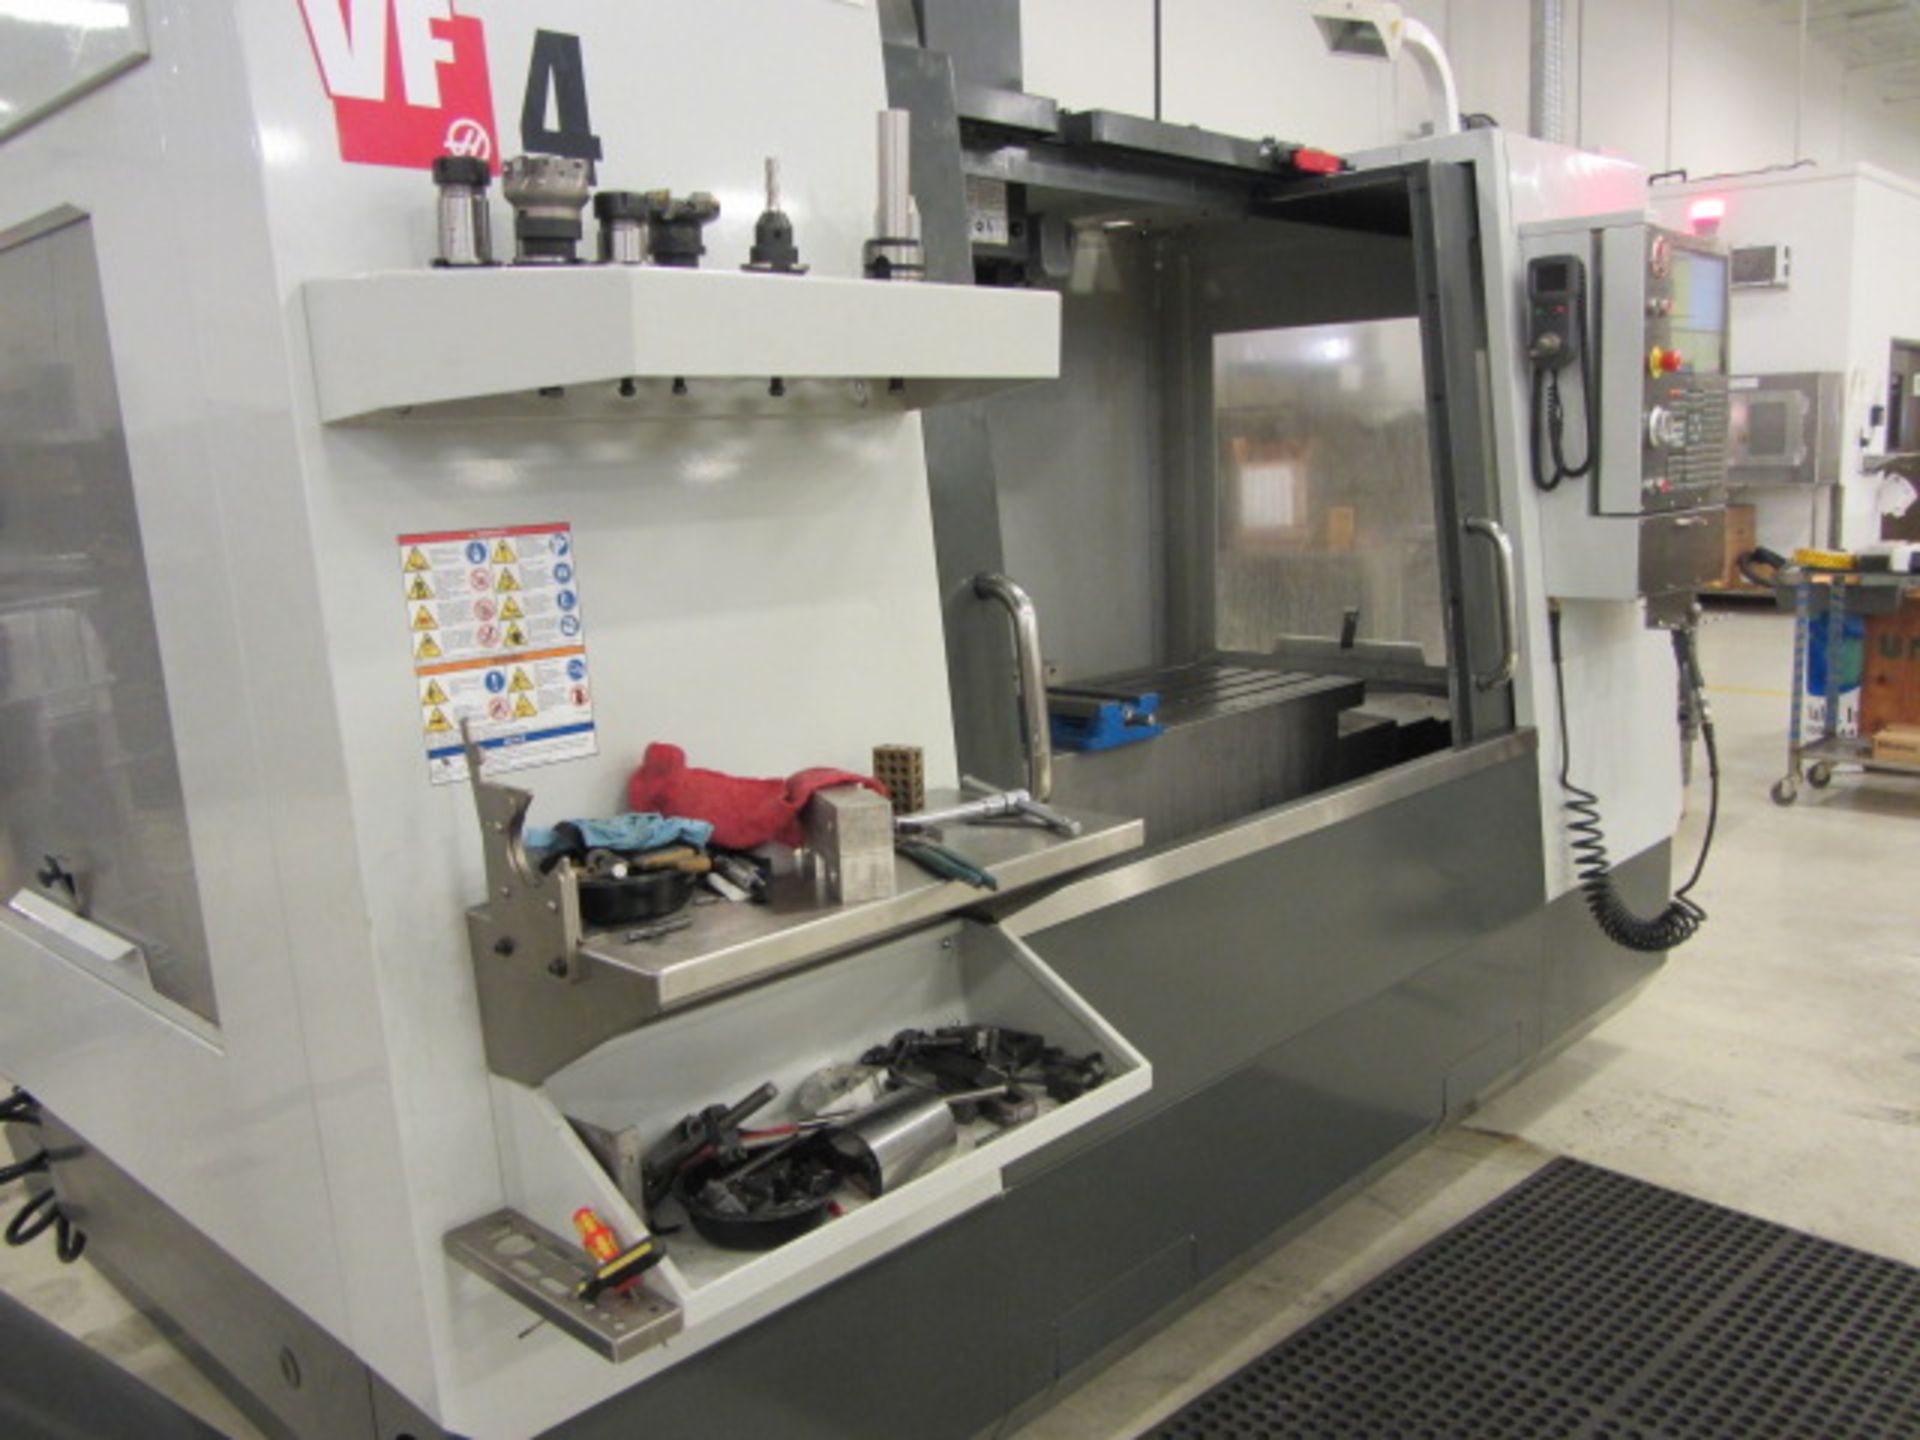 Haas VF-4 CNC Vertical Machining Center with 52'' x 18'' Table, #40 Taper Spindle Speeds to 8100 - Bild 6 aus 9